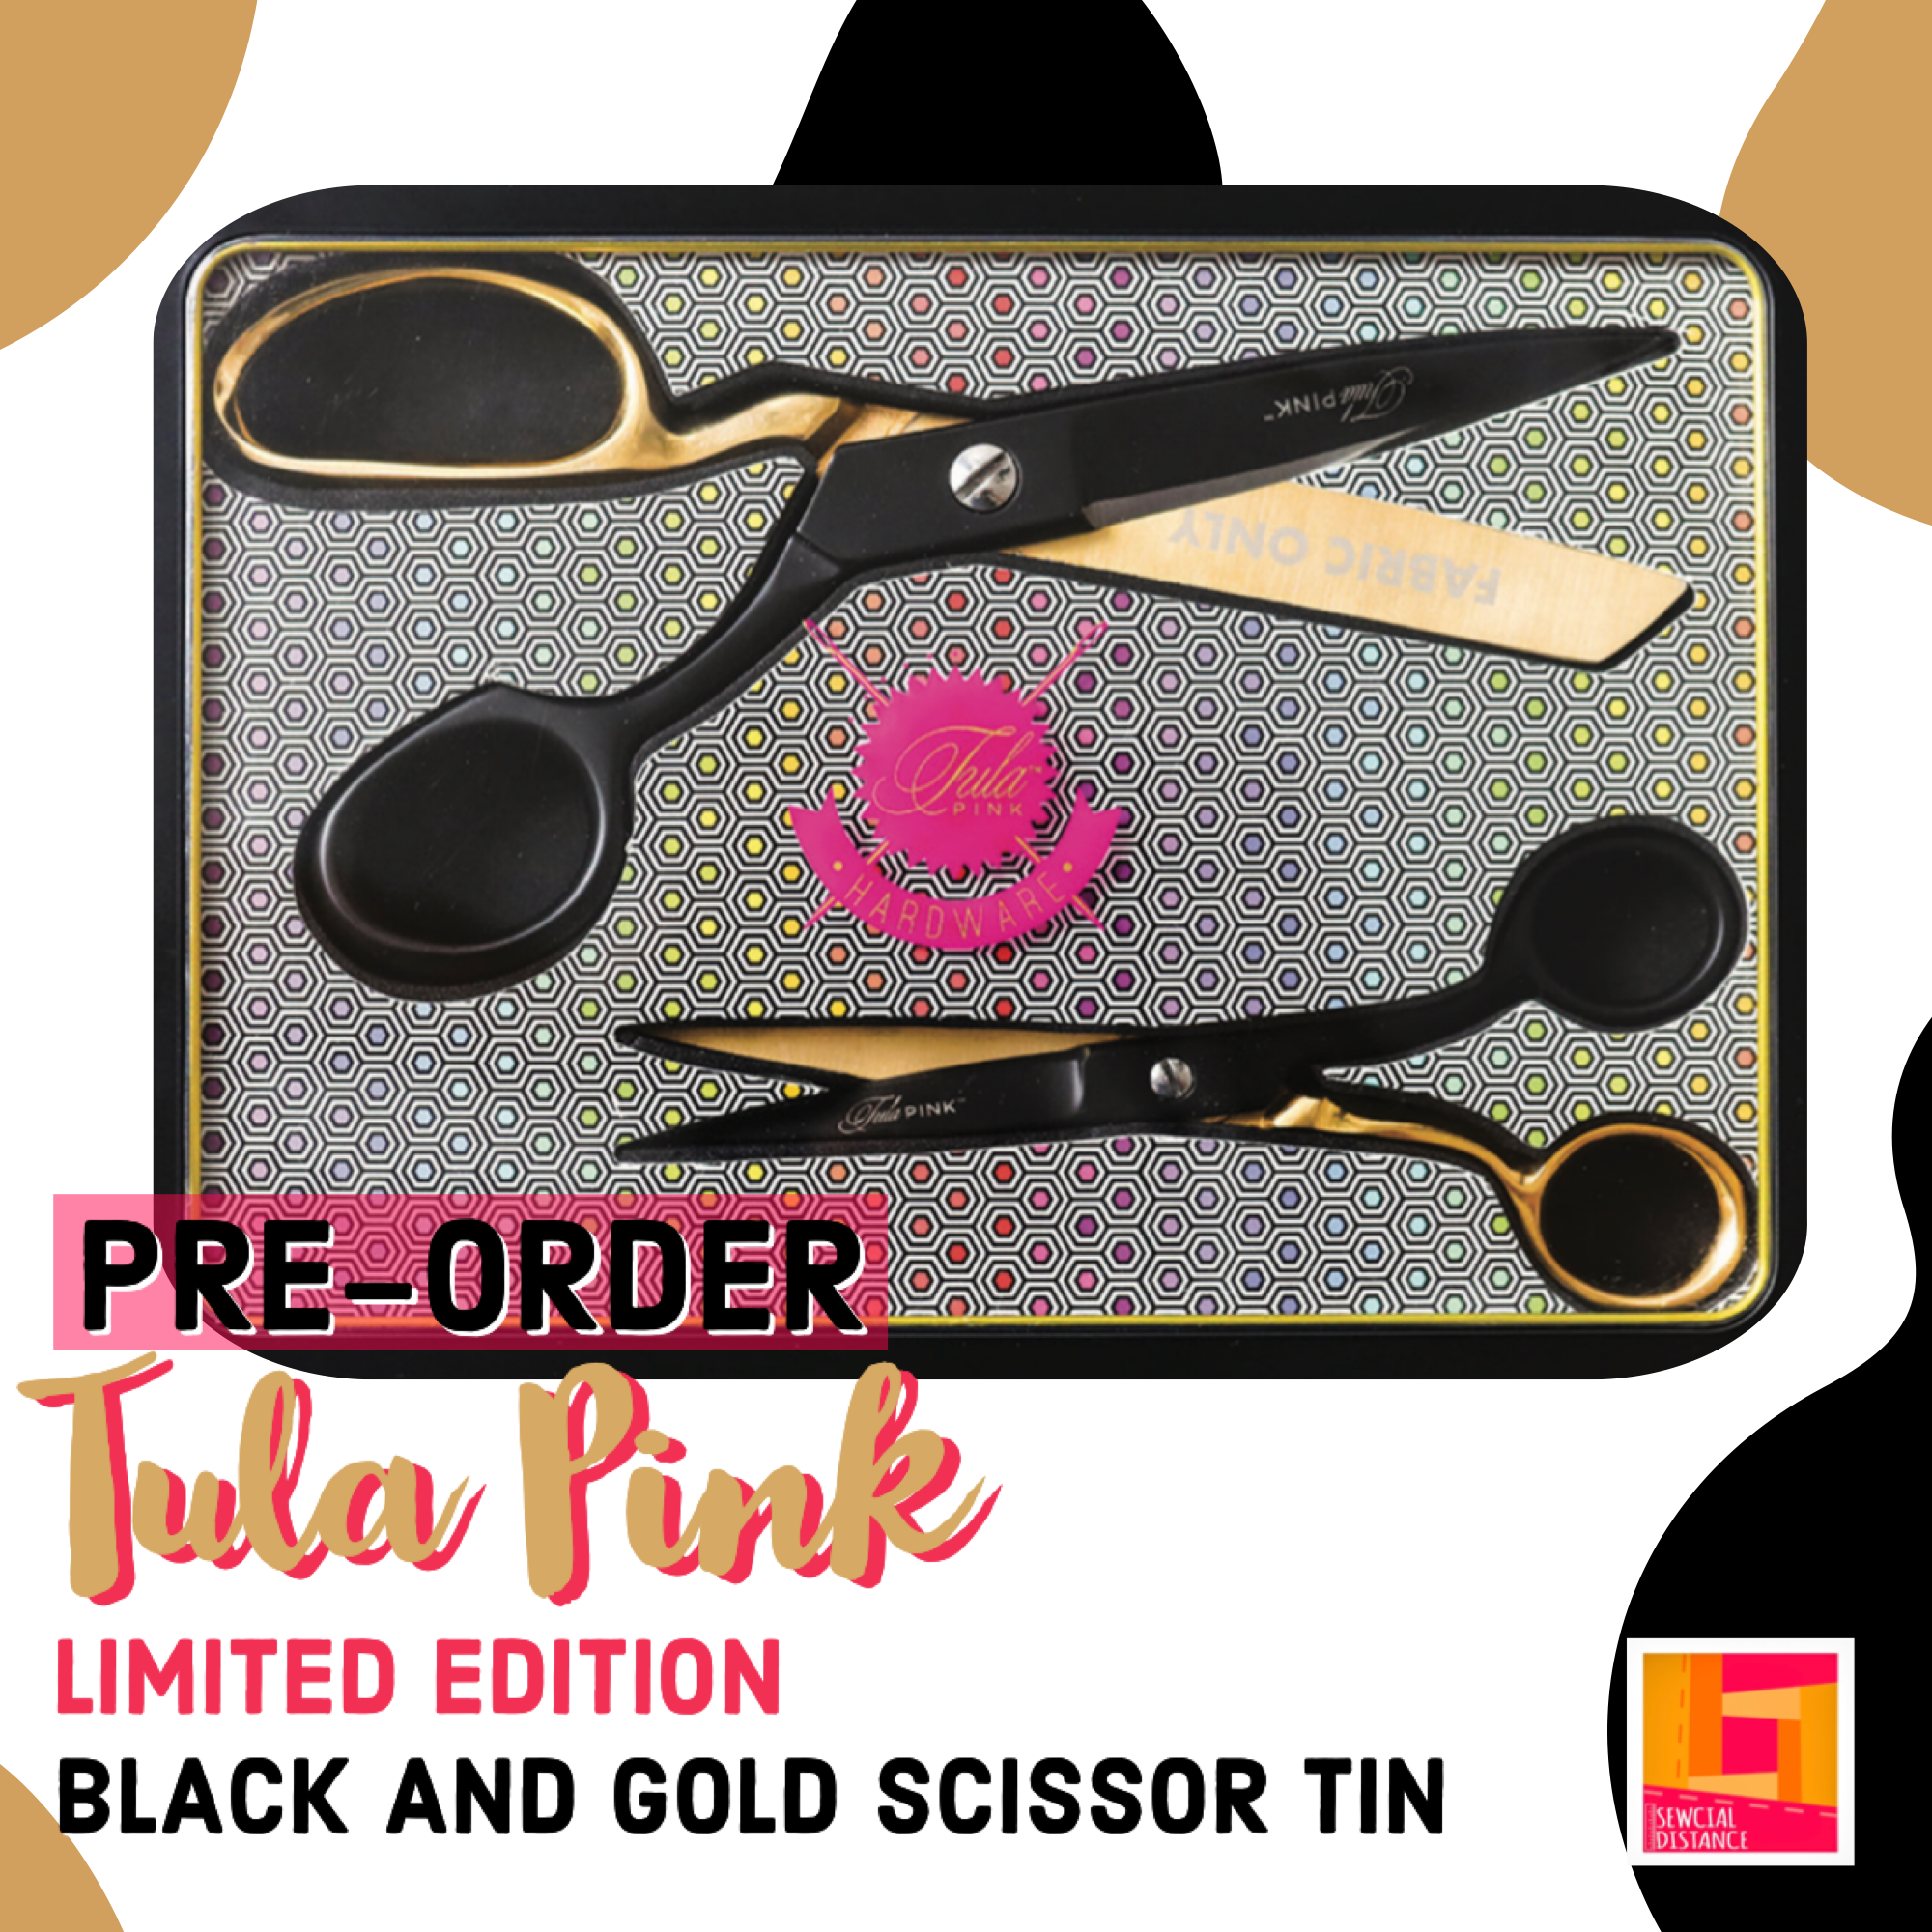 LIMITED EDITION! Tula Pink Limited Edition Black & Gold Scissor Tin